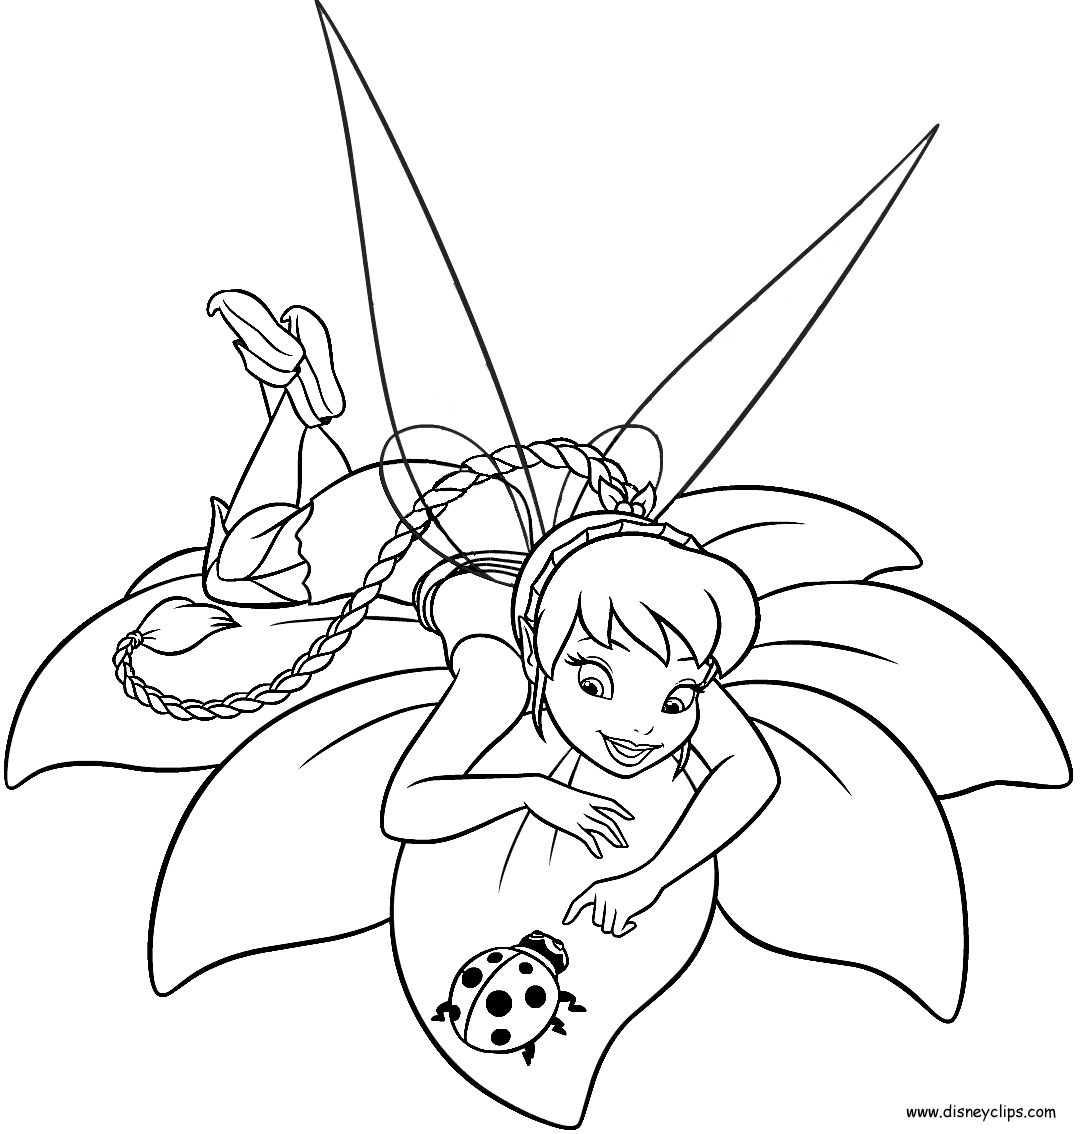 coloring pages | Pirate fairy ...